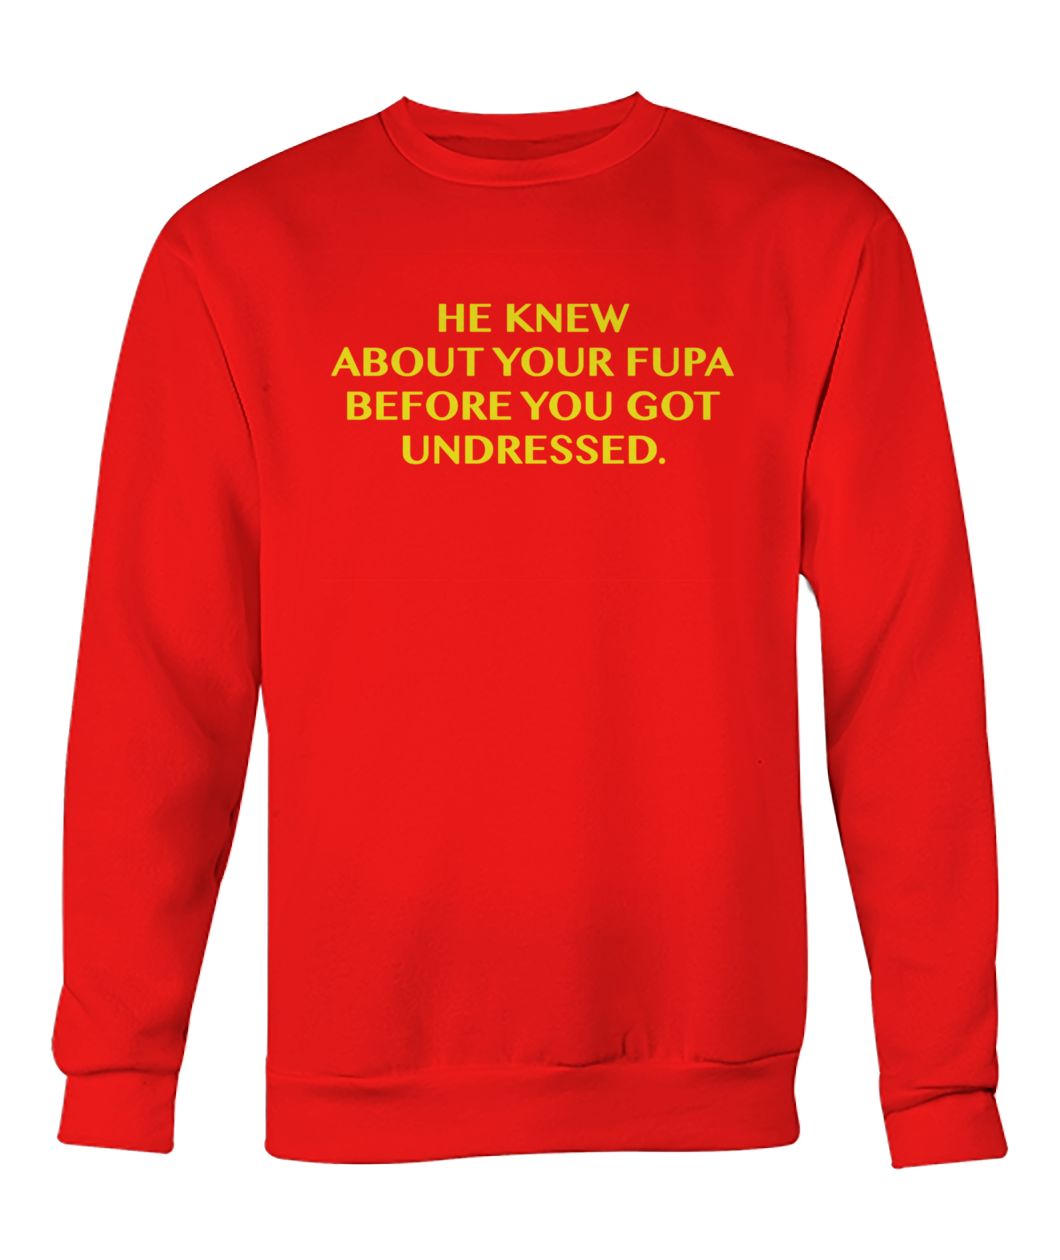 He knew about your fupa before got you undressed crew neck sweatshirt